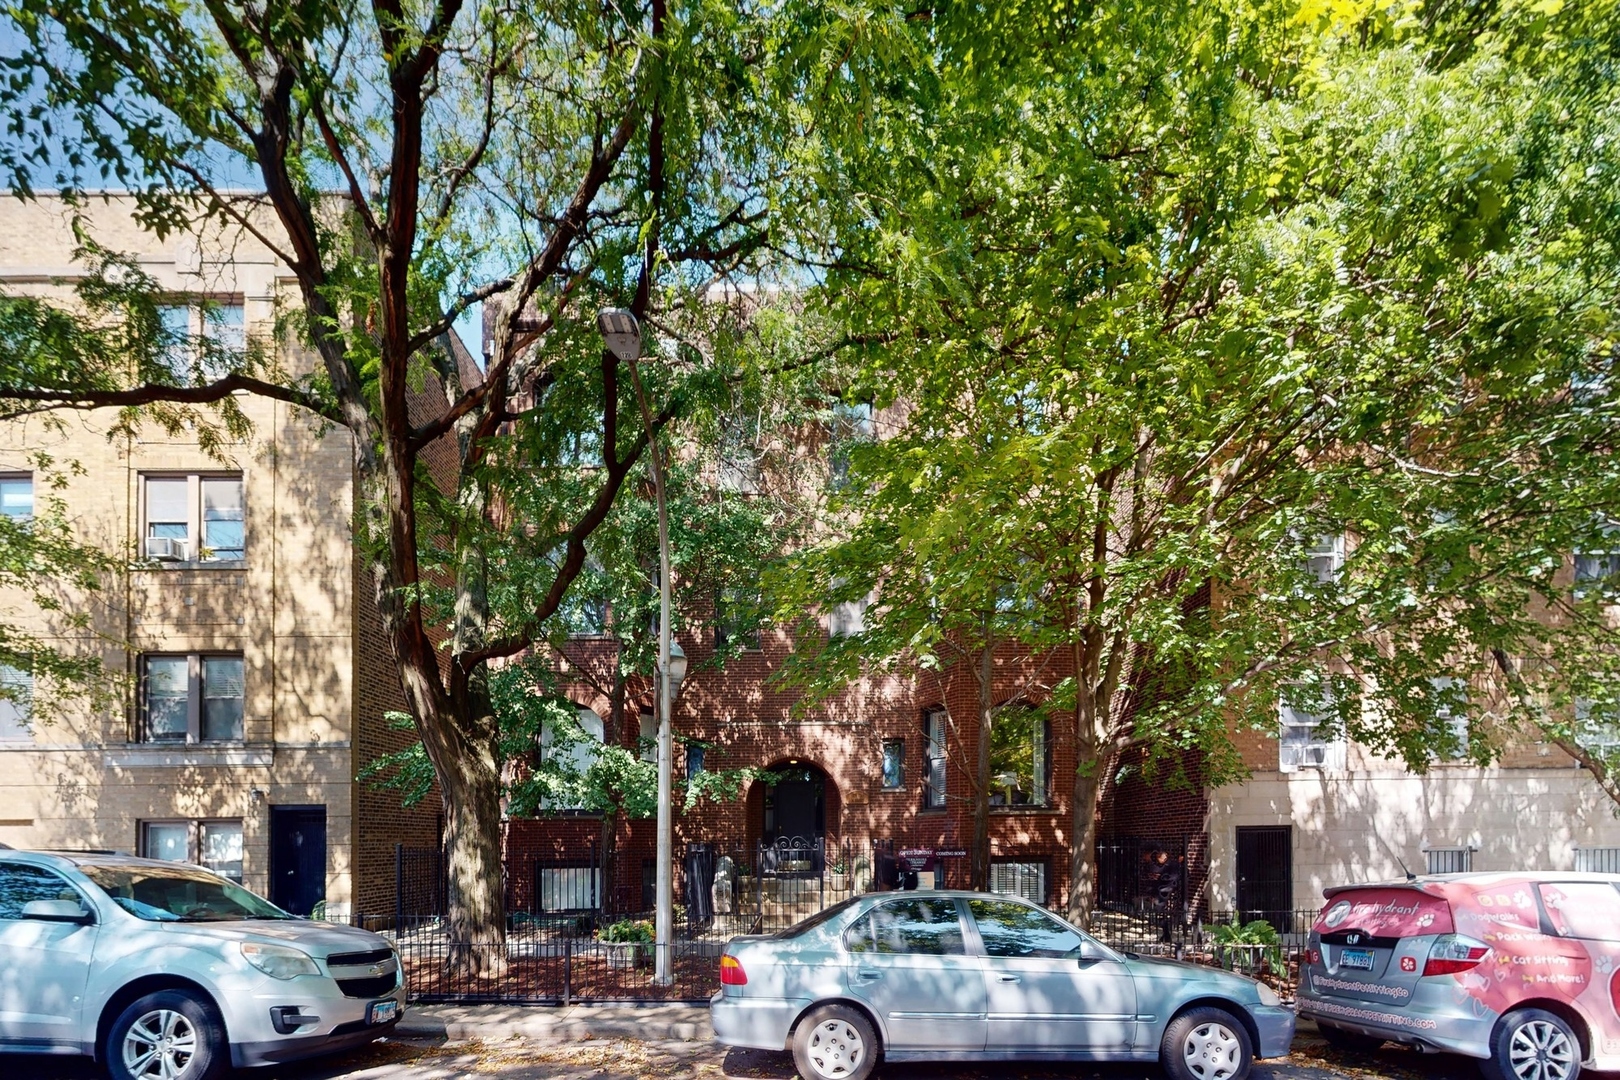 a front view of a building with trees